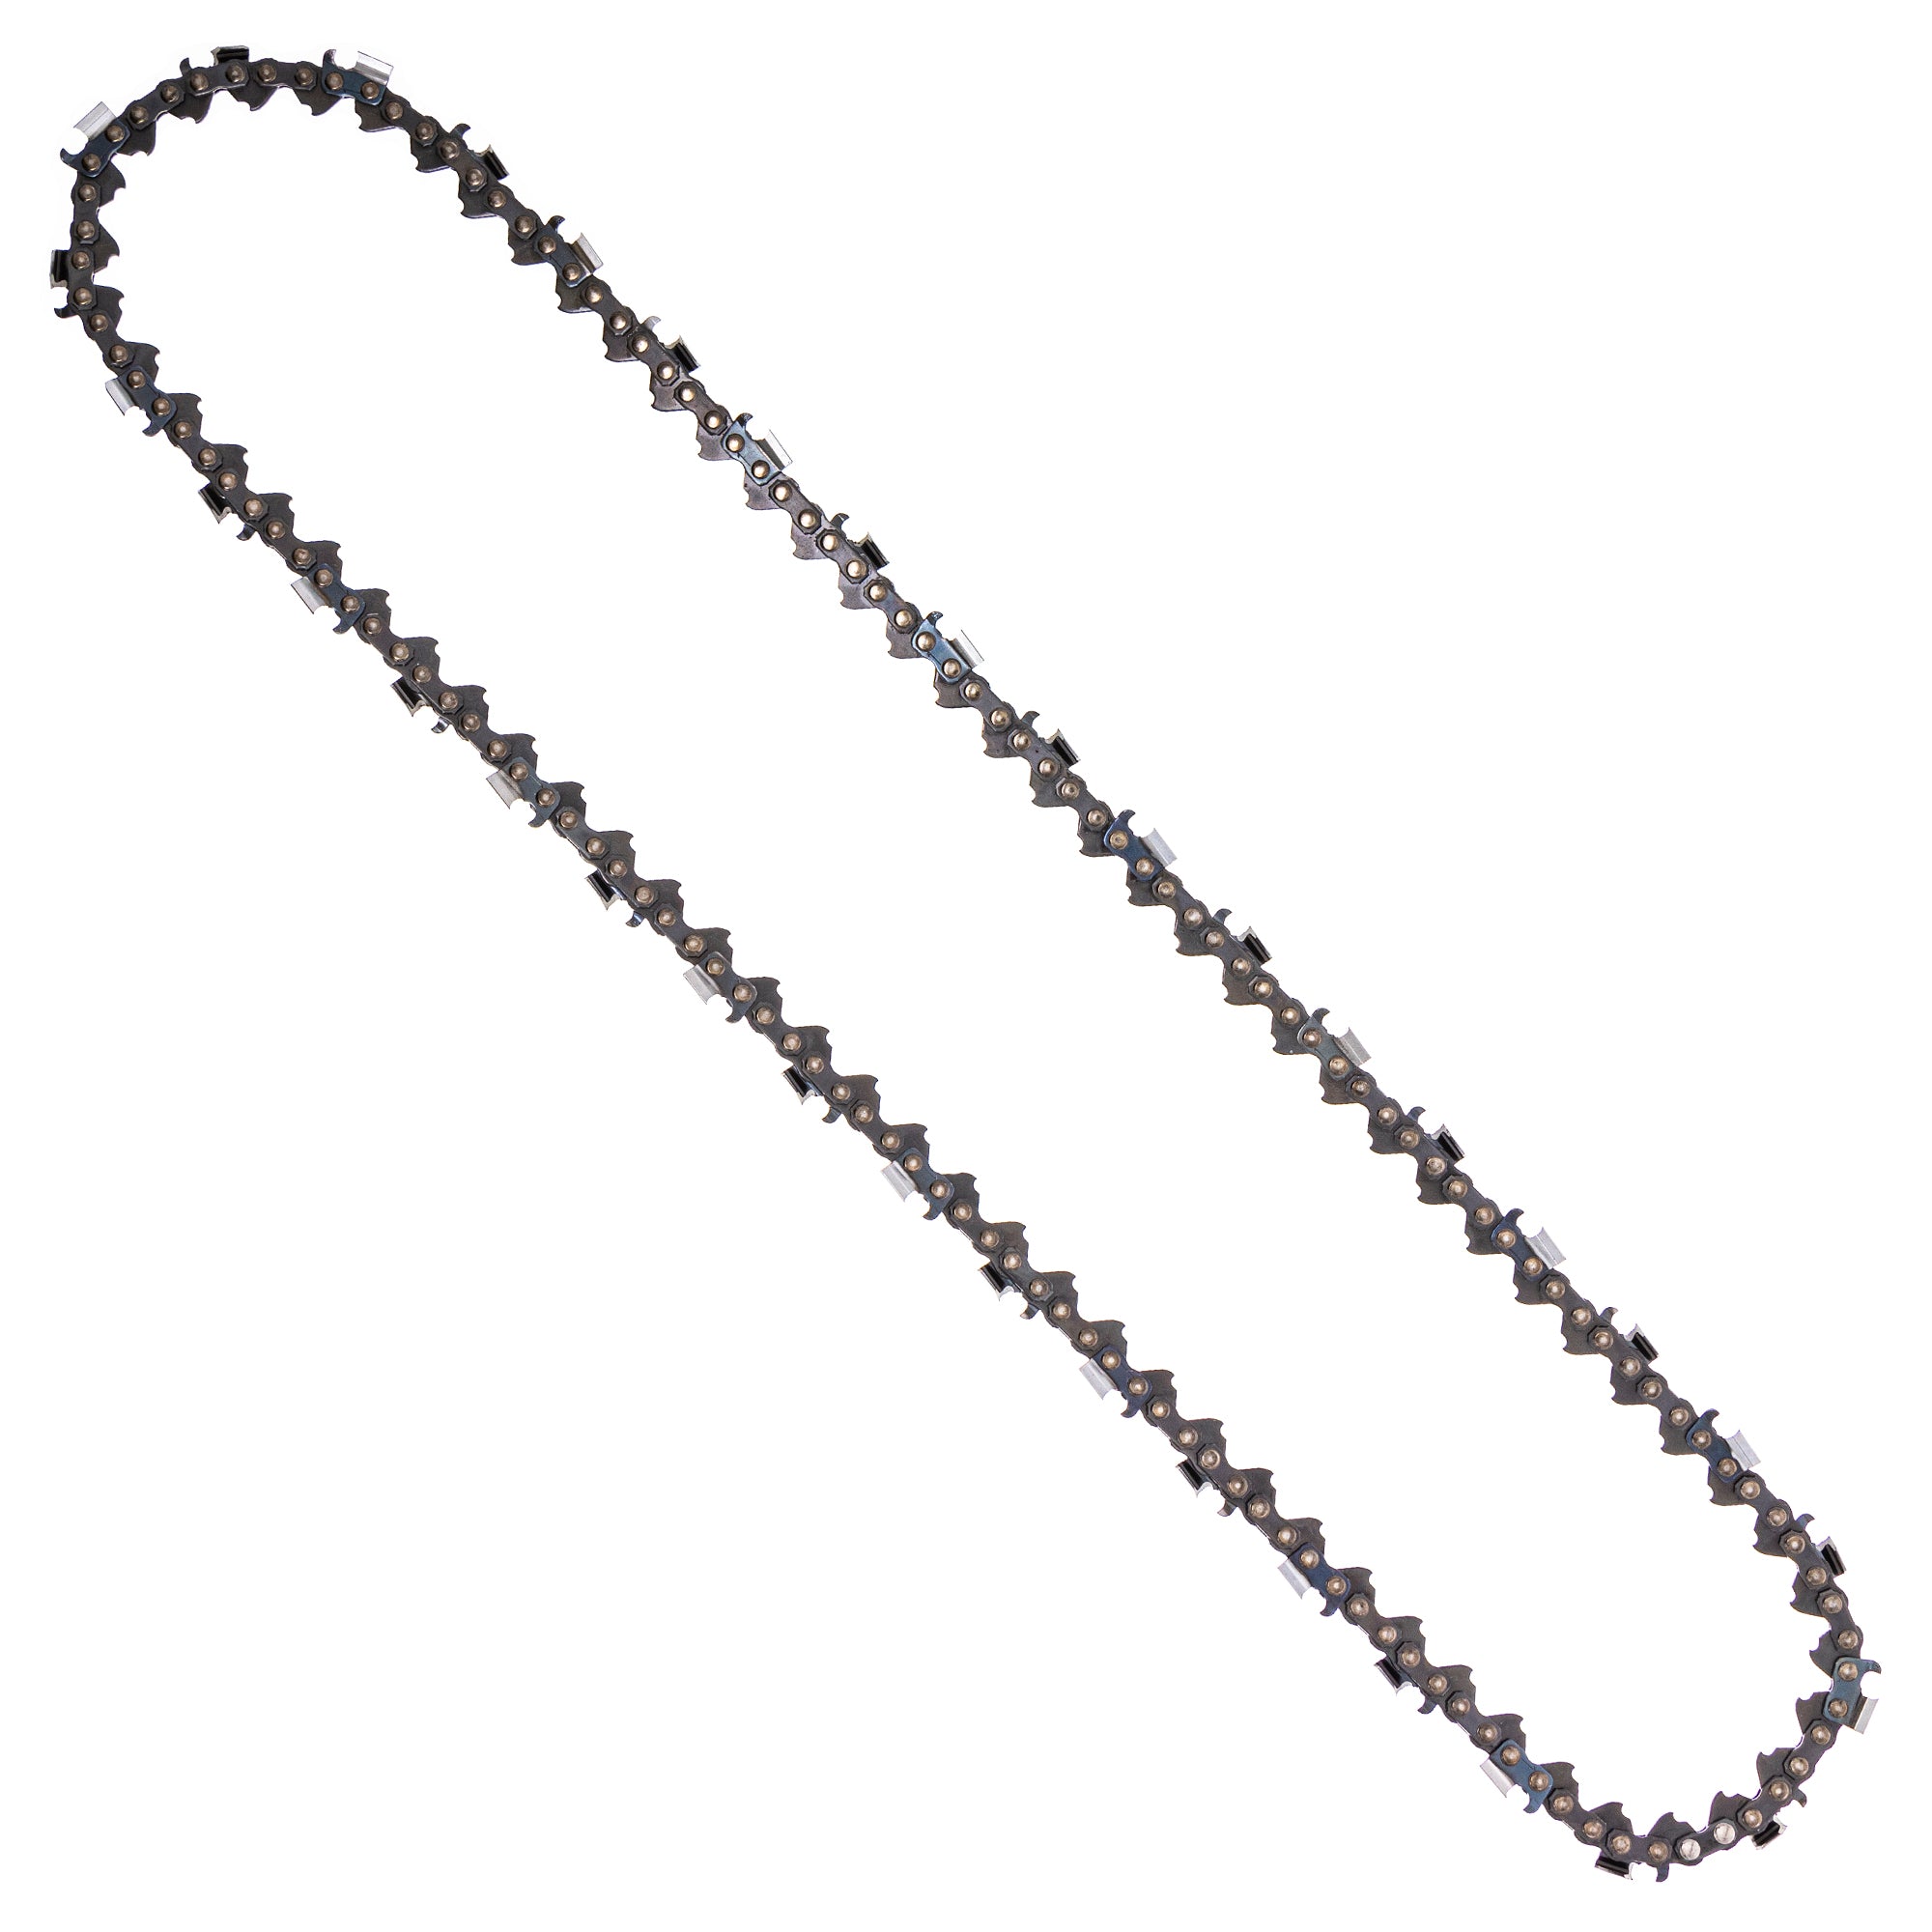 8TEN 810-CCC2230H Chain 6-Pack for zOTHER Stens Oregon Husqvarna